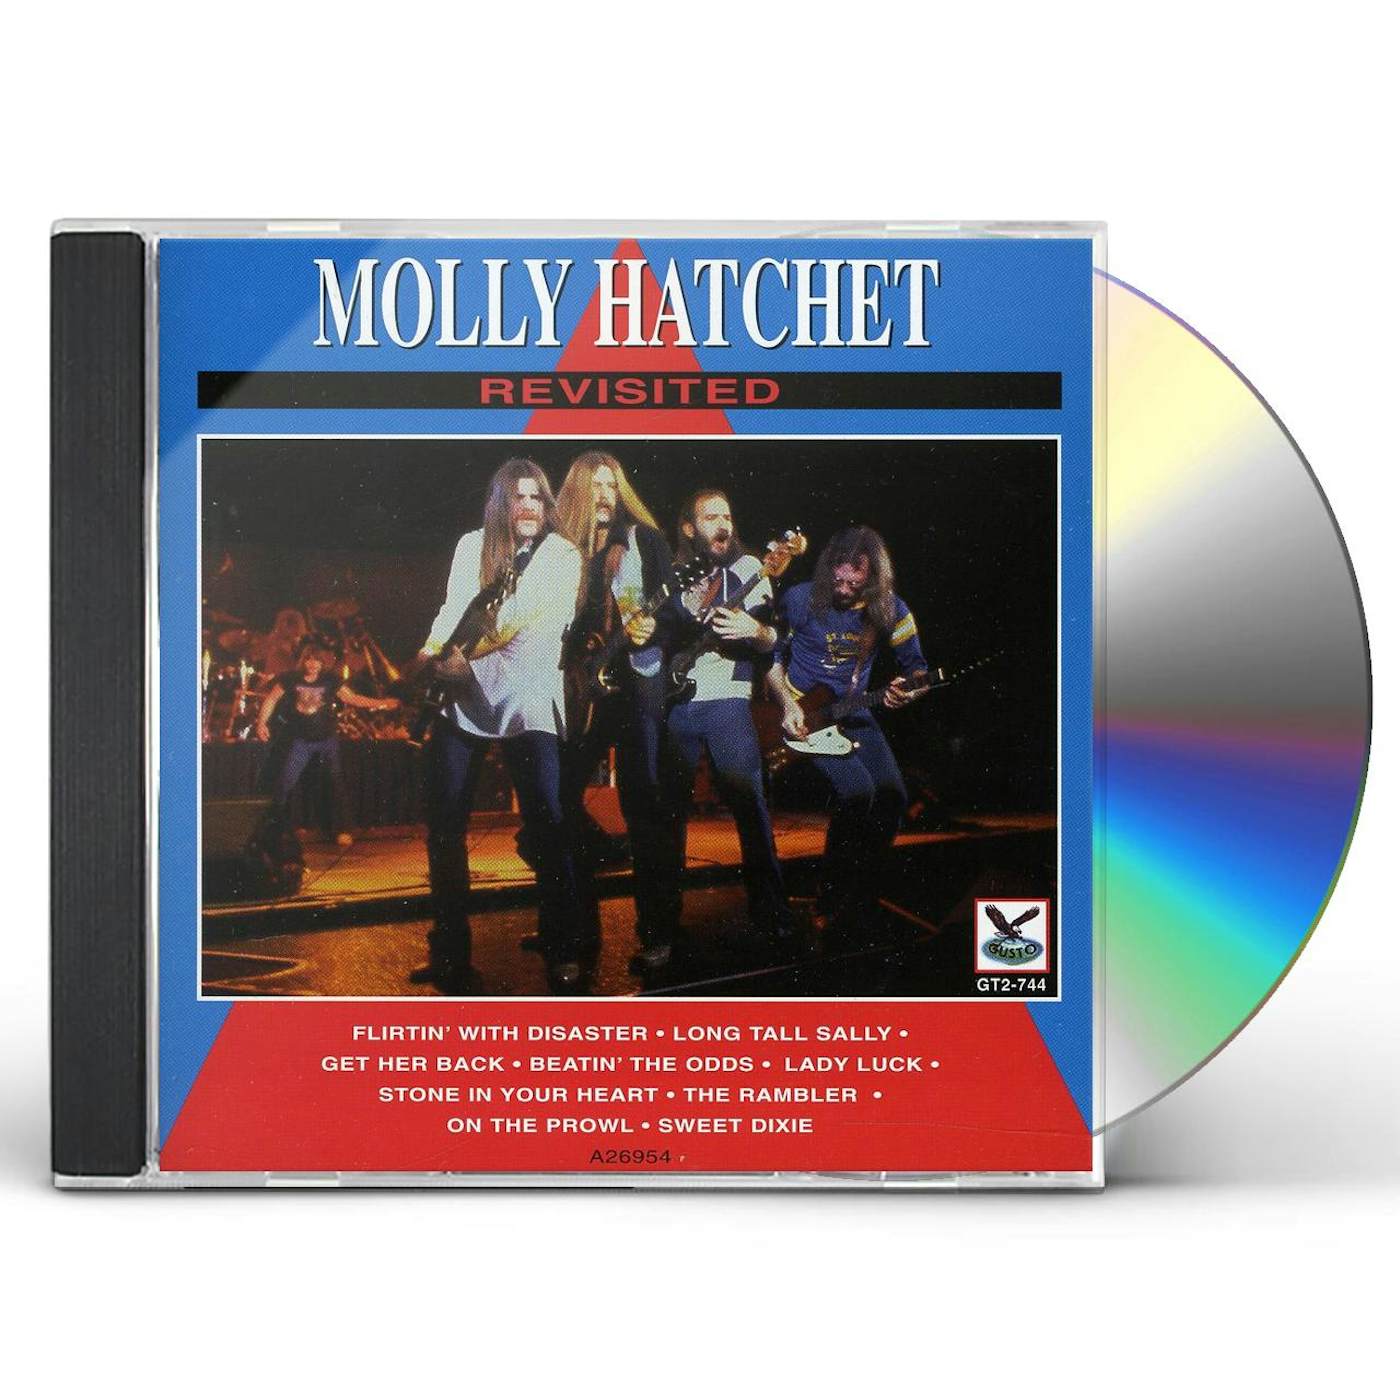 Molly Hatchet REVISITED CD